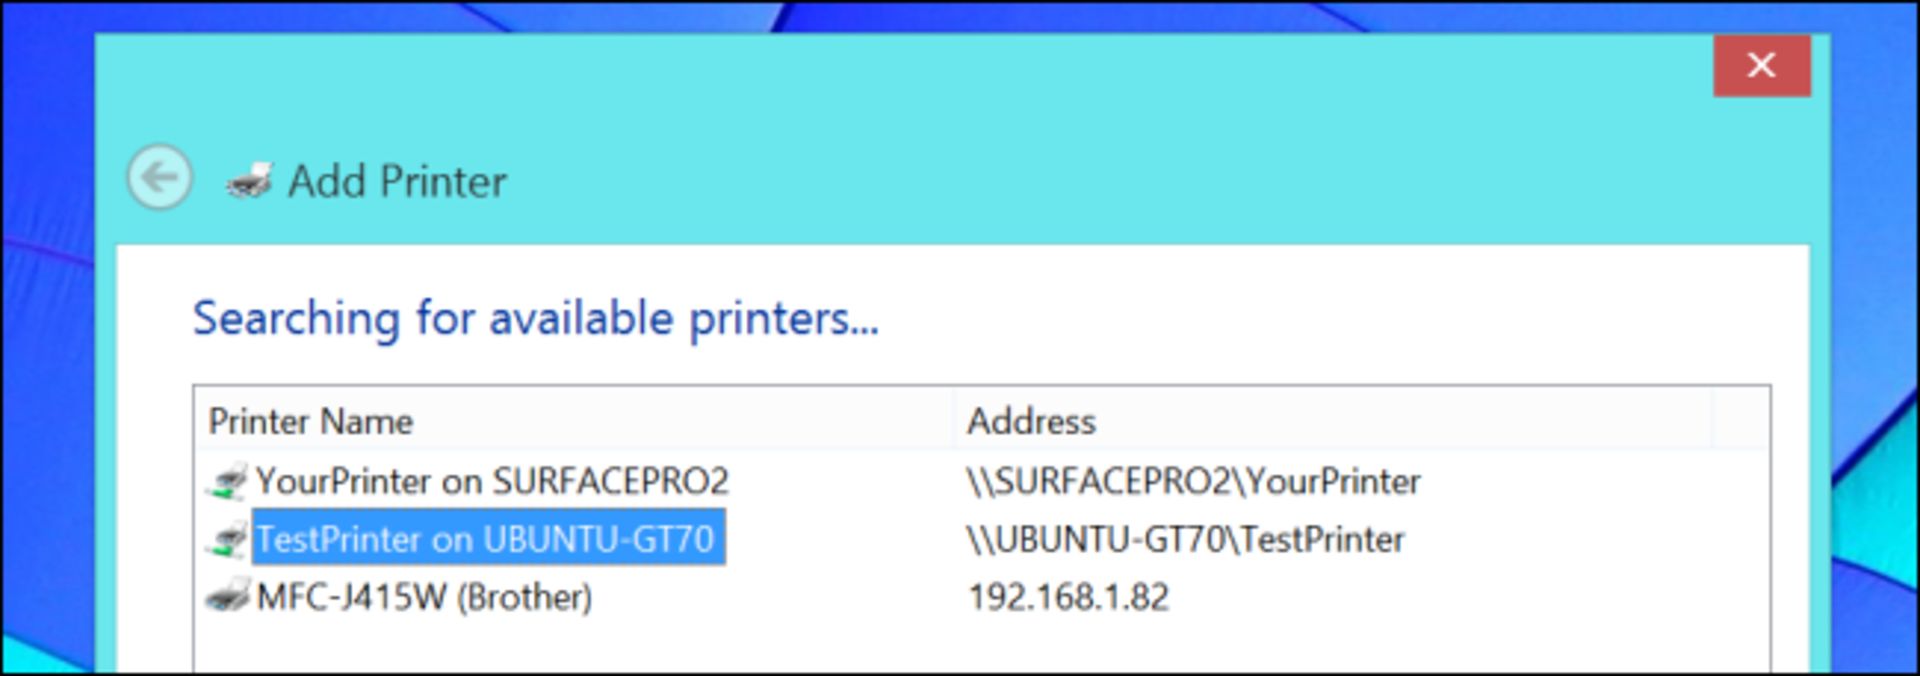 5-add-shared-printer-on-local-network-to-windows